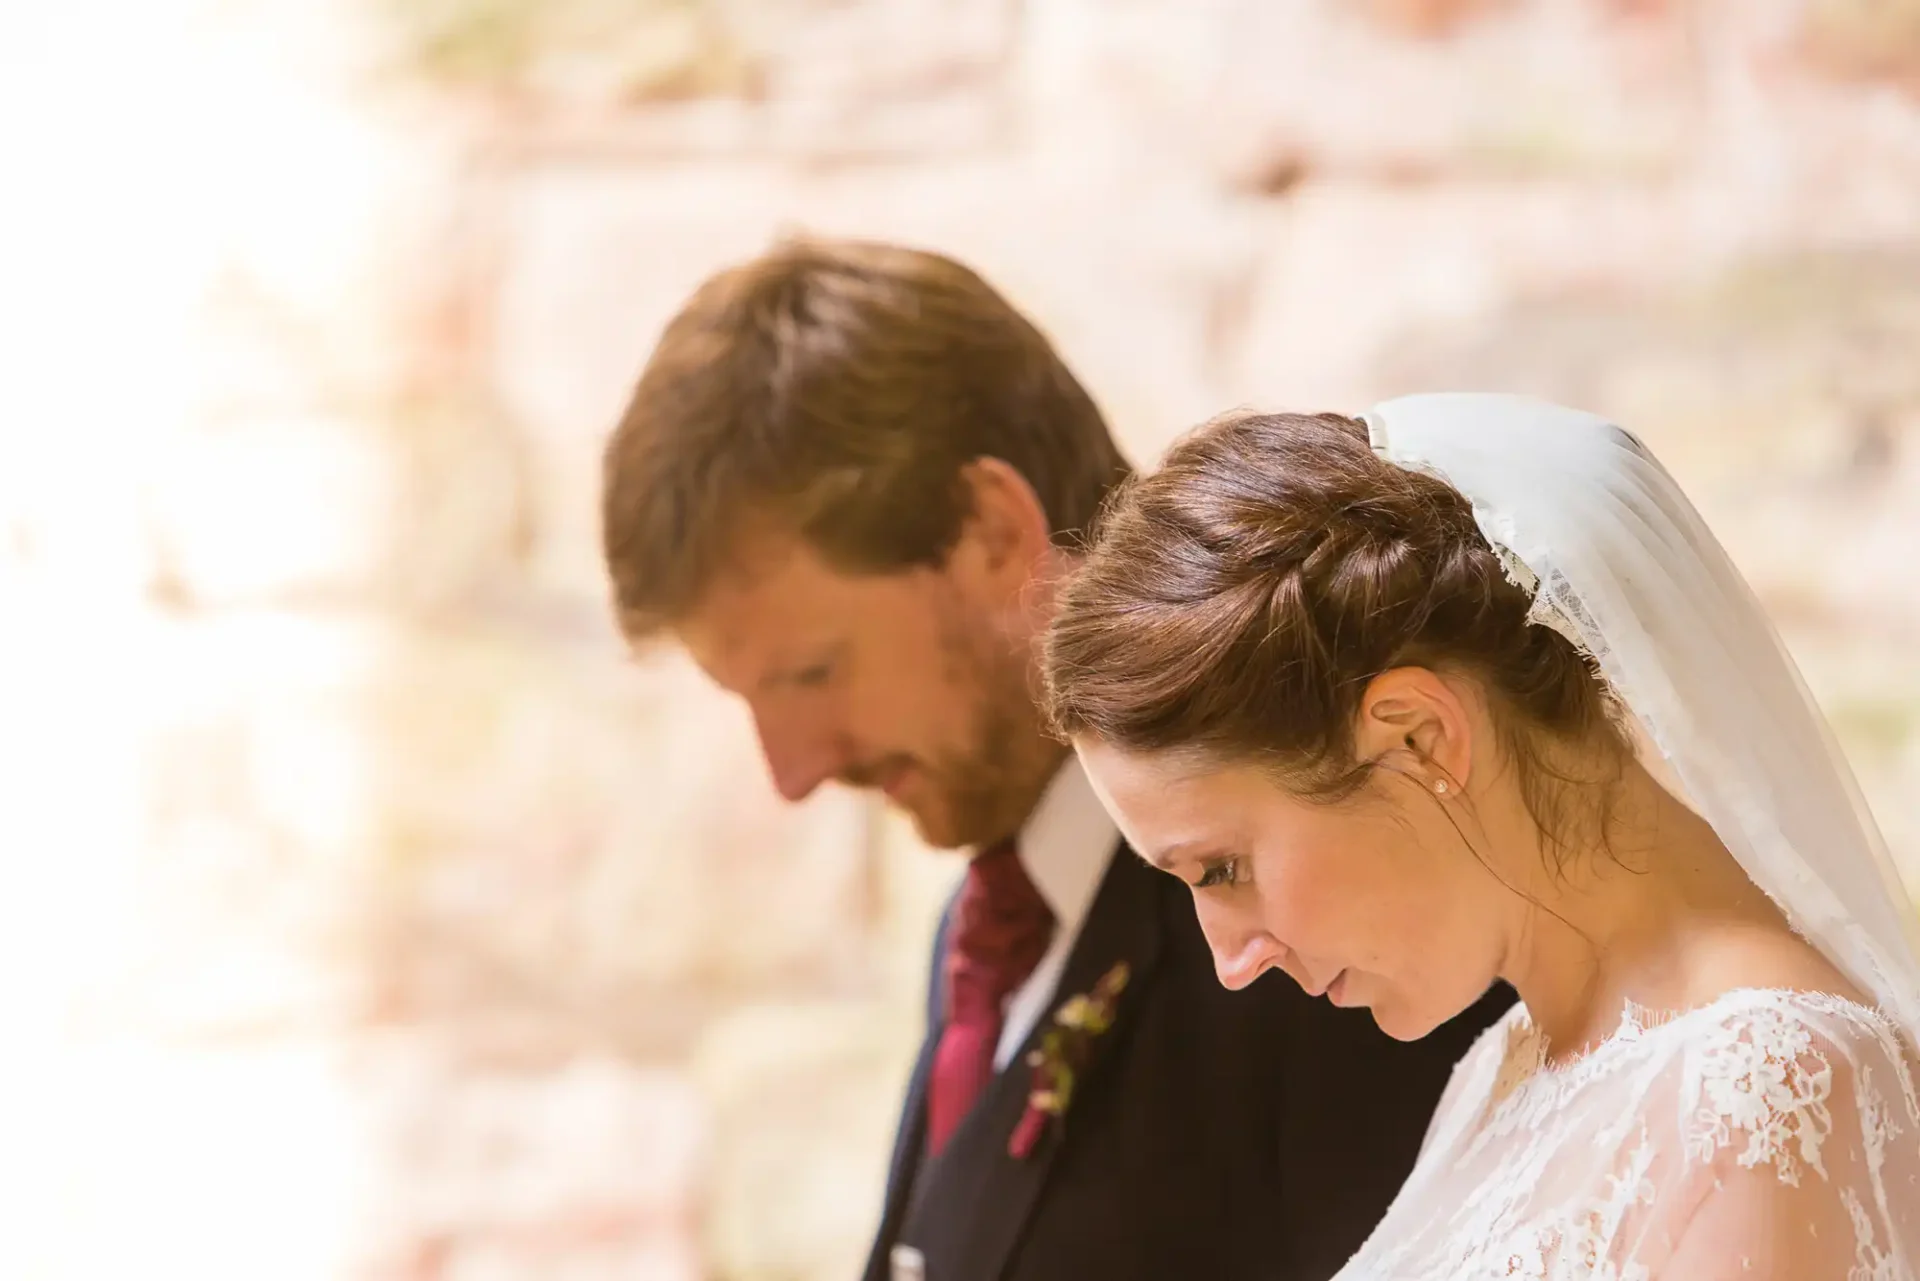 A bride and groom standing together, heads bowed, in soft focus with a warm, light background.